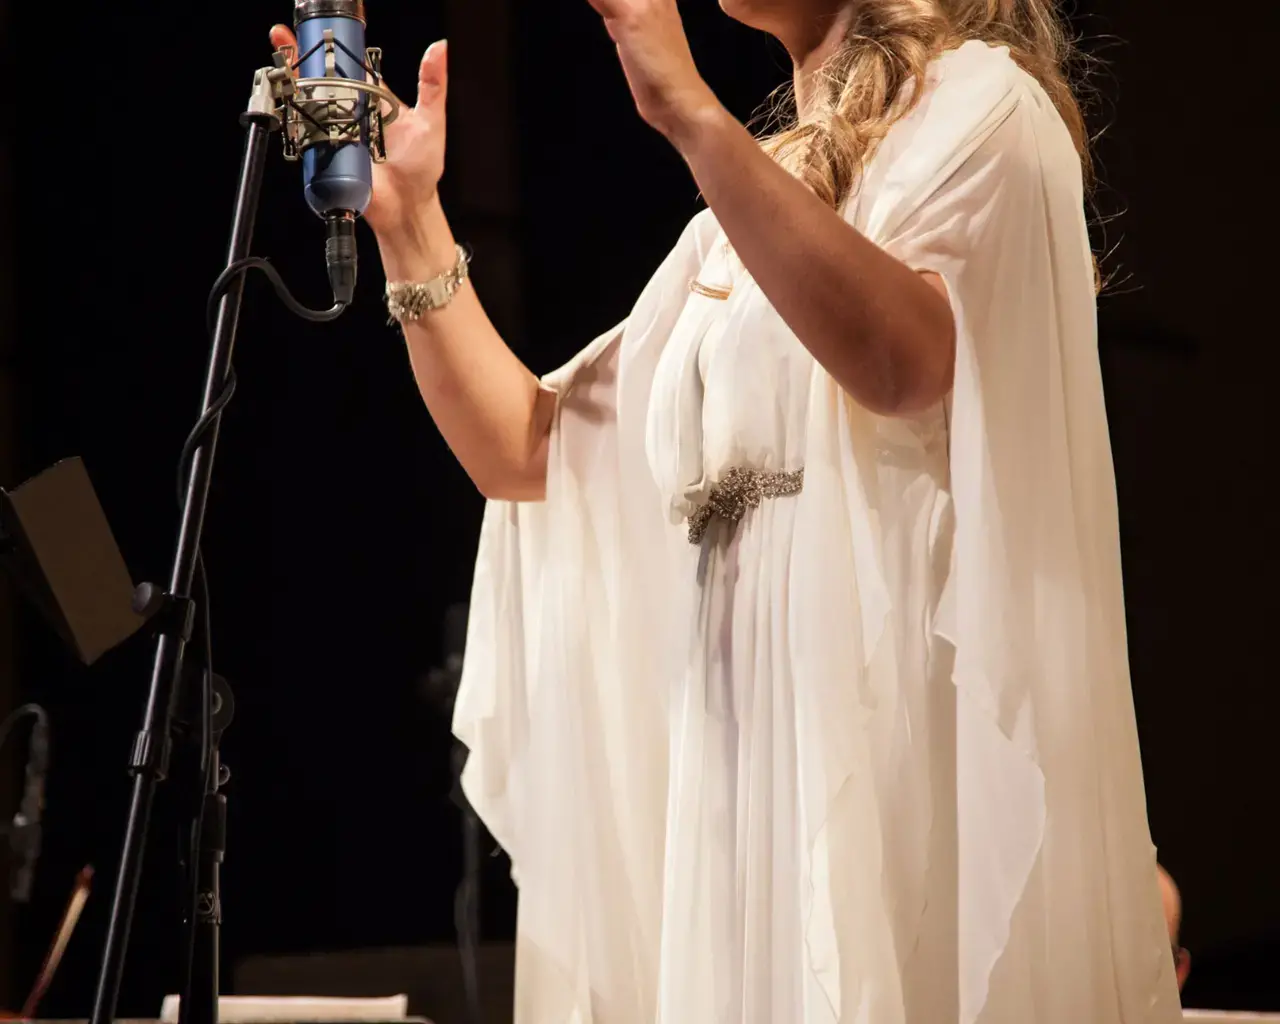 Dalal Abu Amneh in concert, 2015. Photo by Chip Colson.